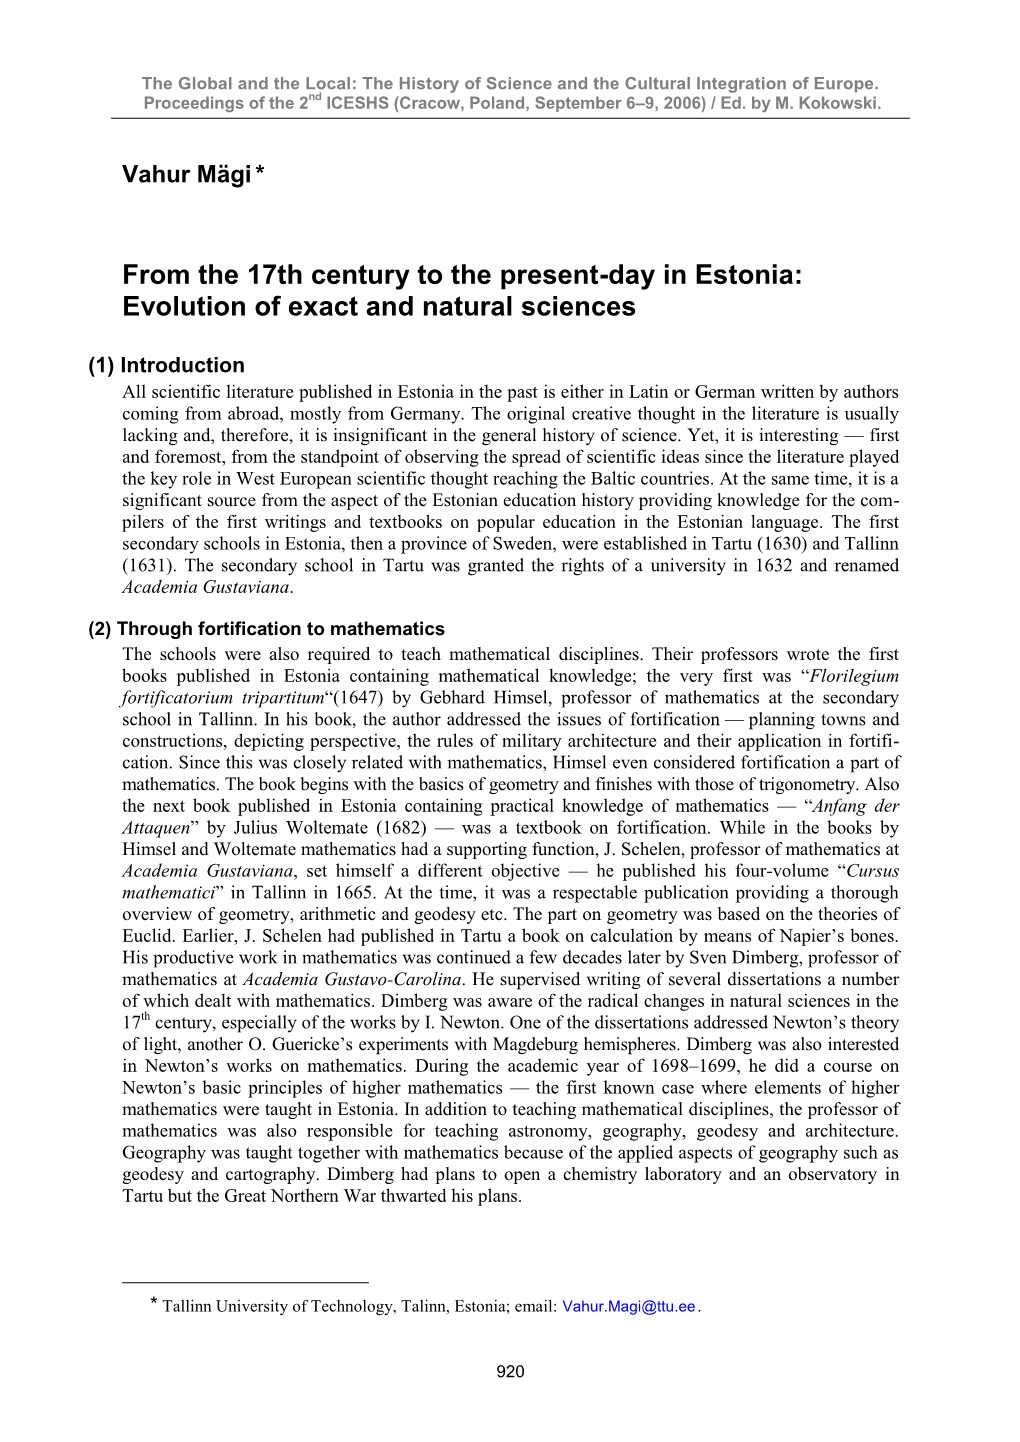 From the 17Th Century to the Present-Day in Estonia: Evolution of Exact and Natural Sciences